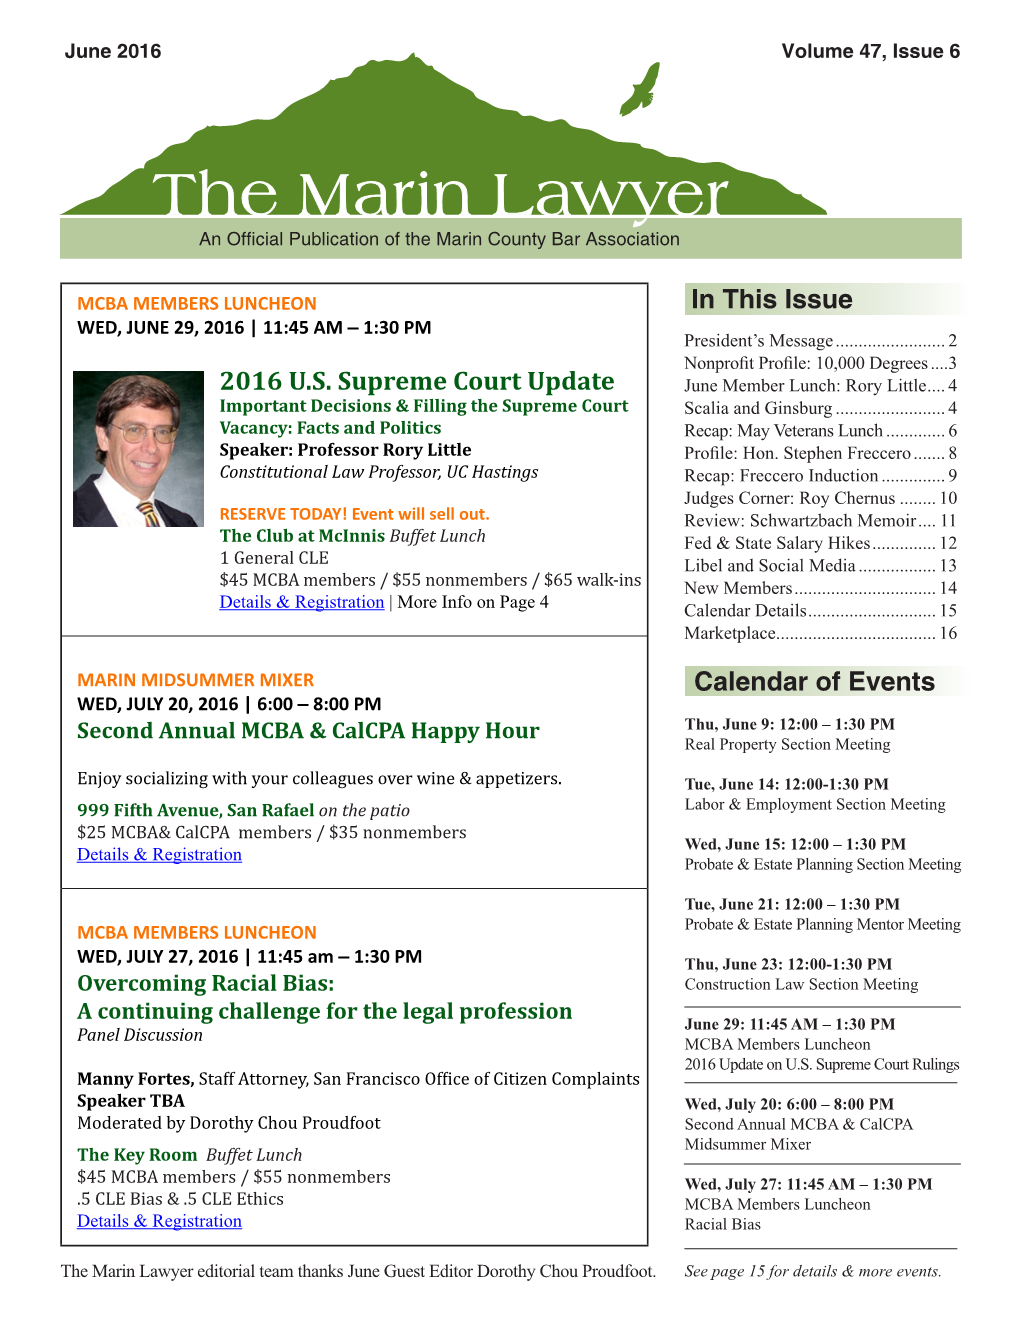 Calendar of Events in This Issue 2016 U.S. Supreme Court Update